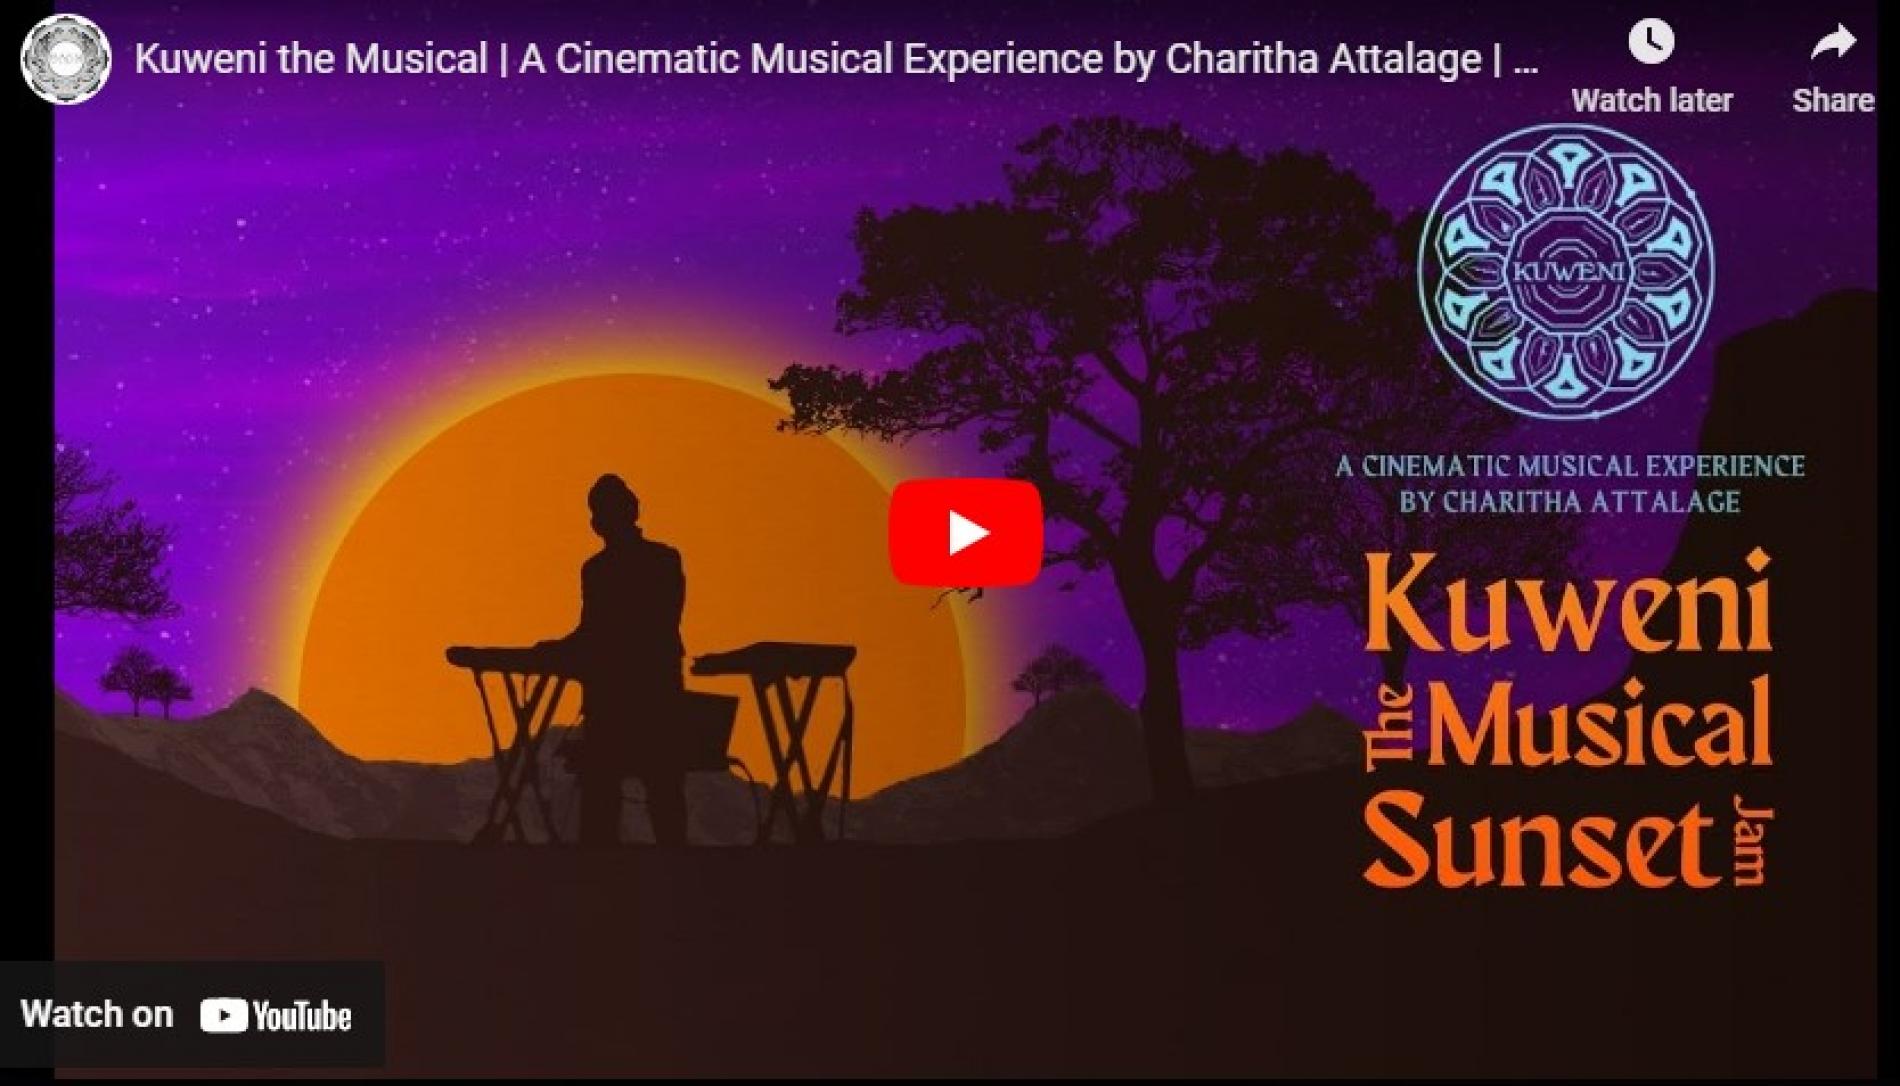 New Music : Kuweni the Musical | A Cinematic Musical Experience by Charitha Attalage | LIVE Sunset Jam